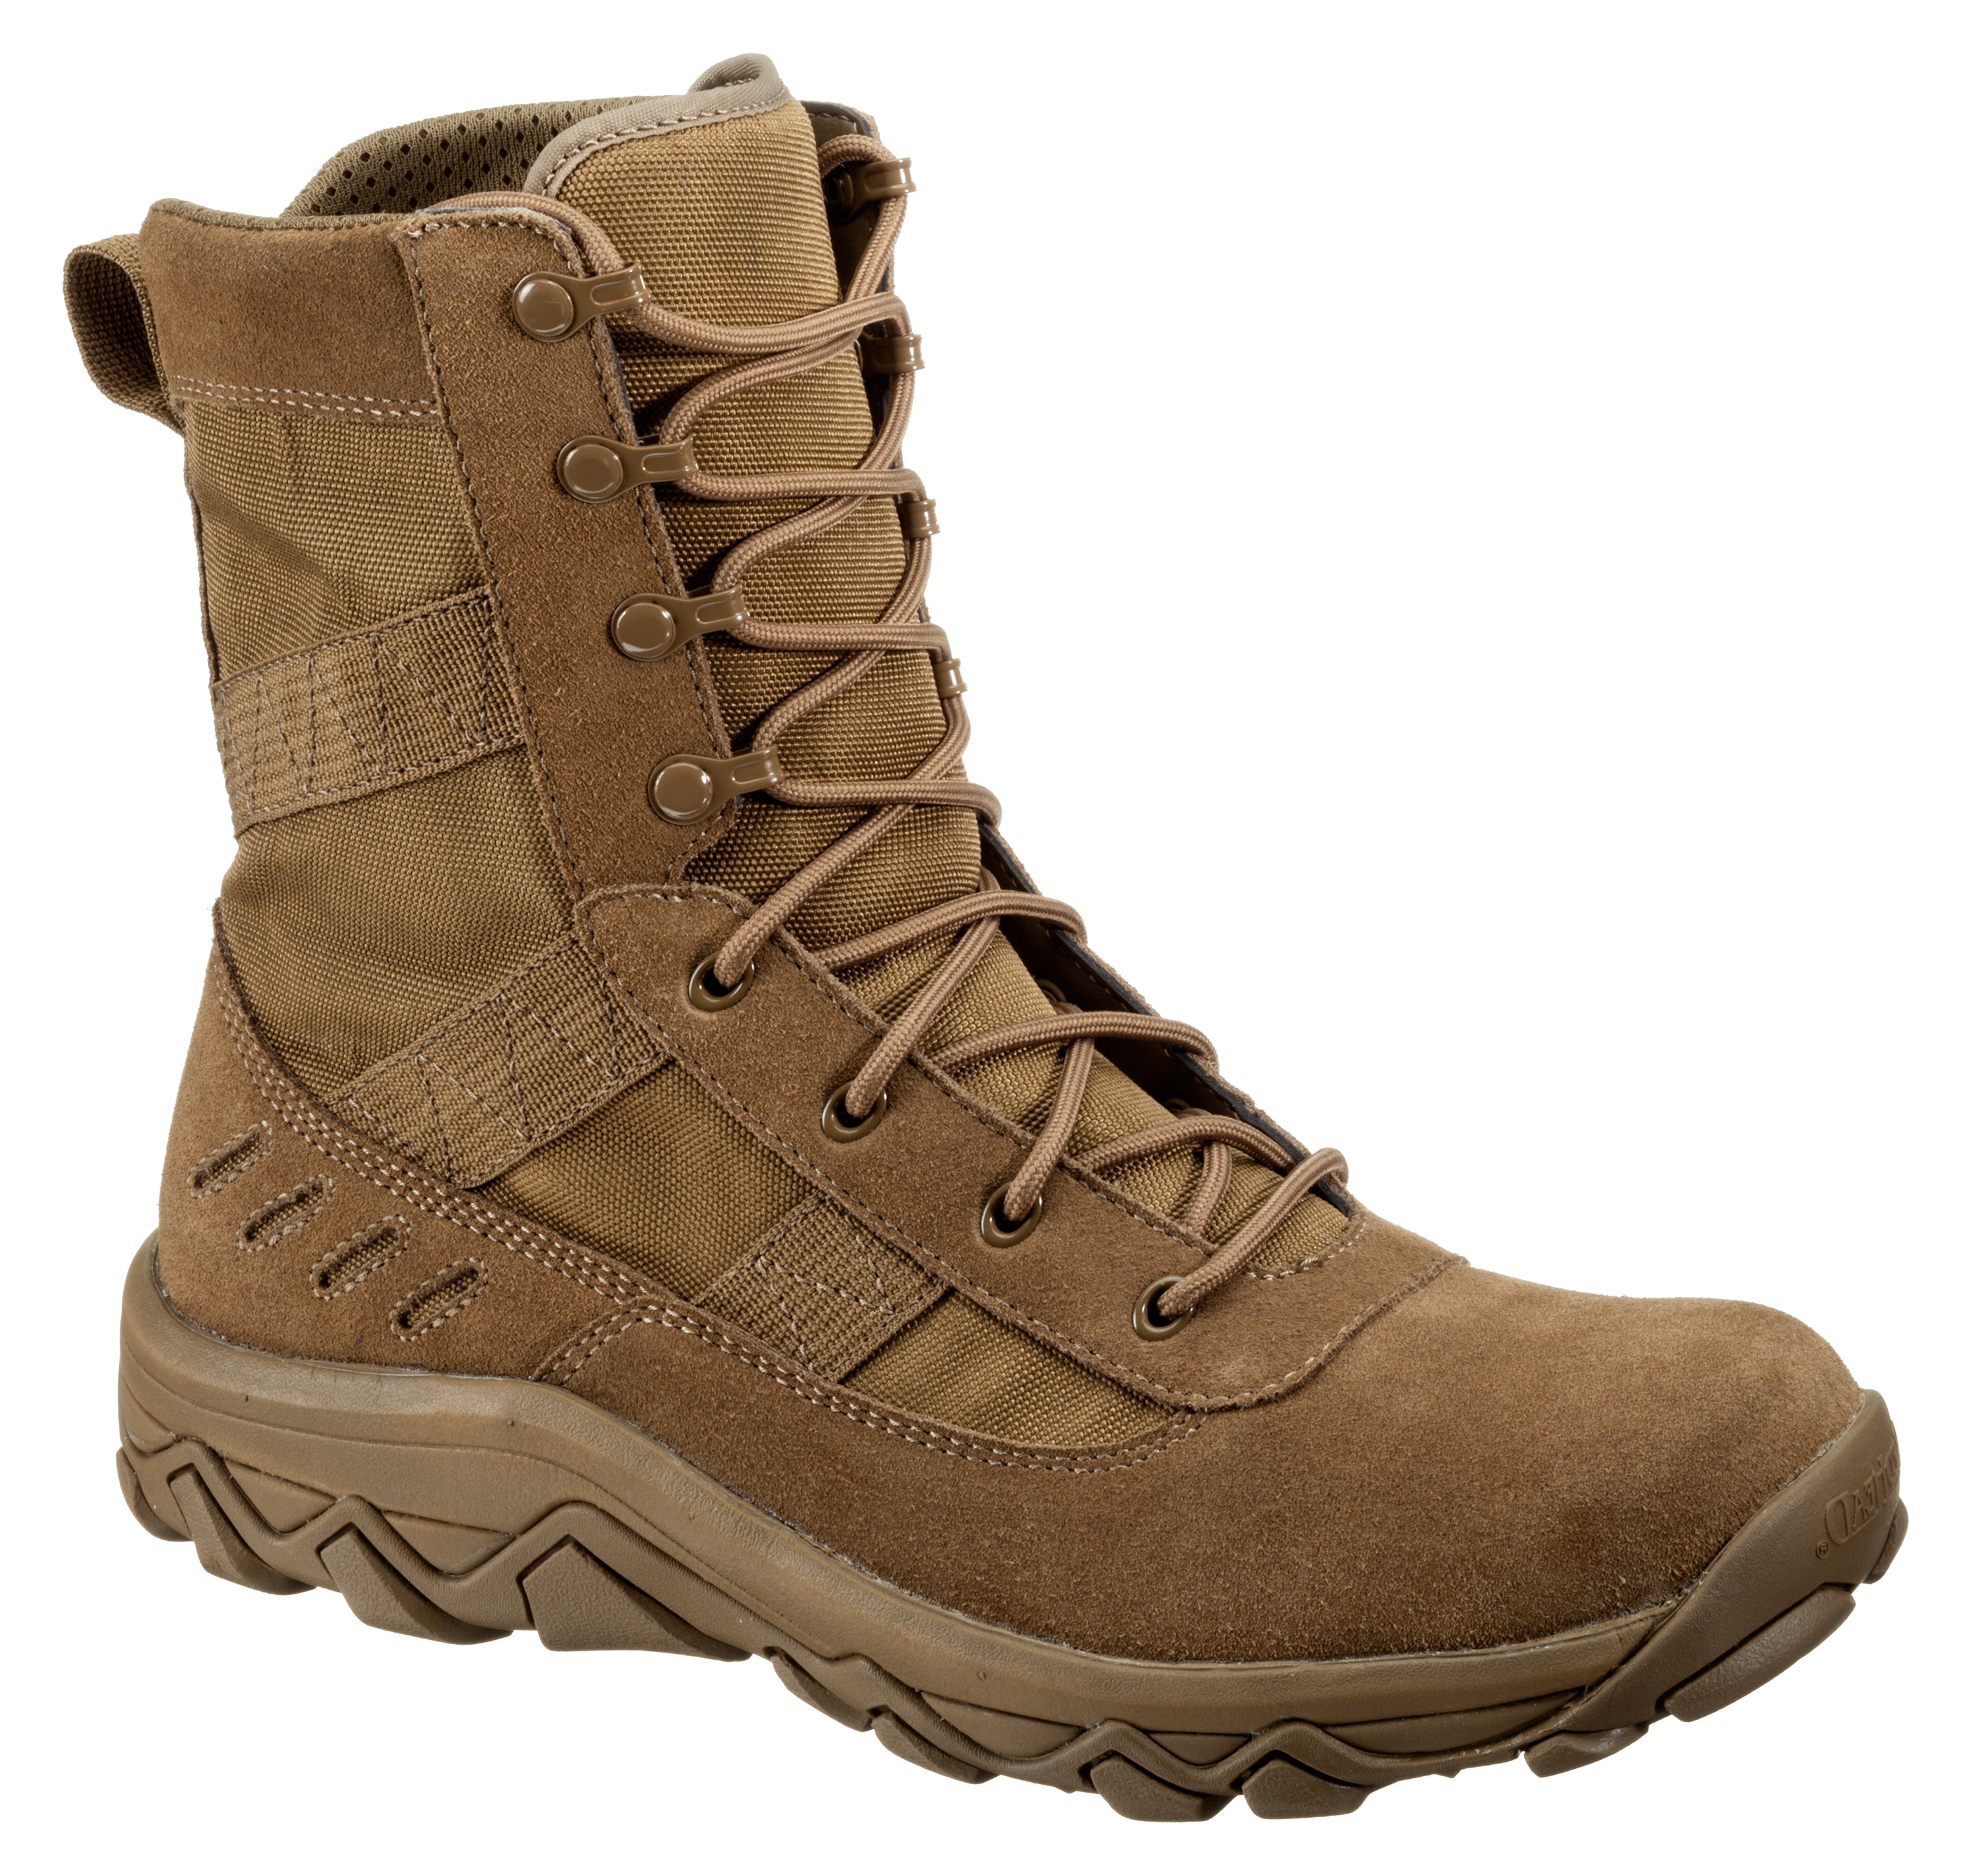 RedHead RCT Warrior Ultra Mil-Spec Tactical Boots for Men - Coyote - 8M